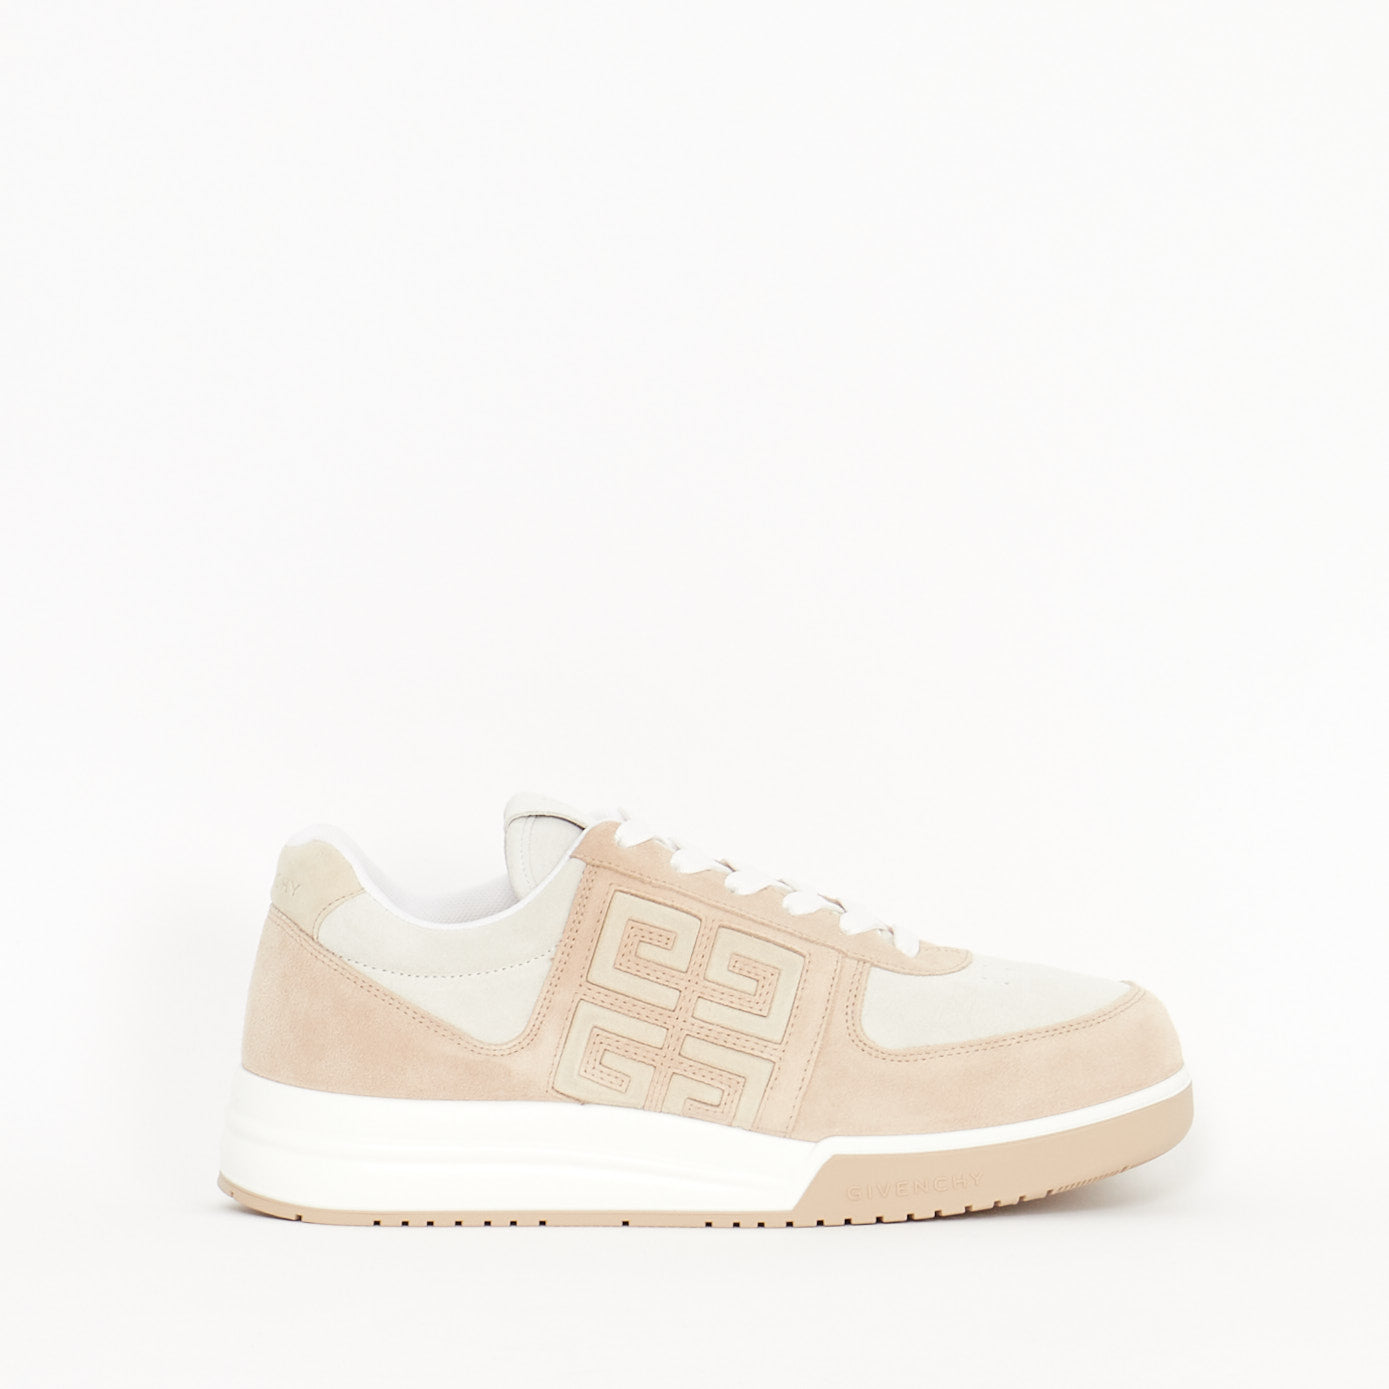 Sneakers Givenchy G4 Suède Beige